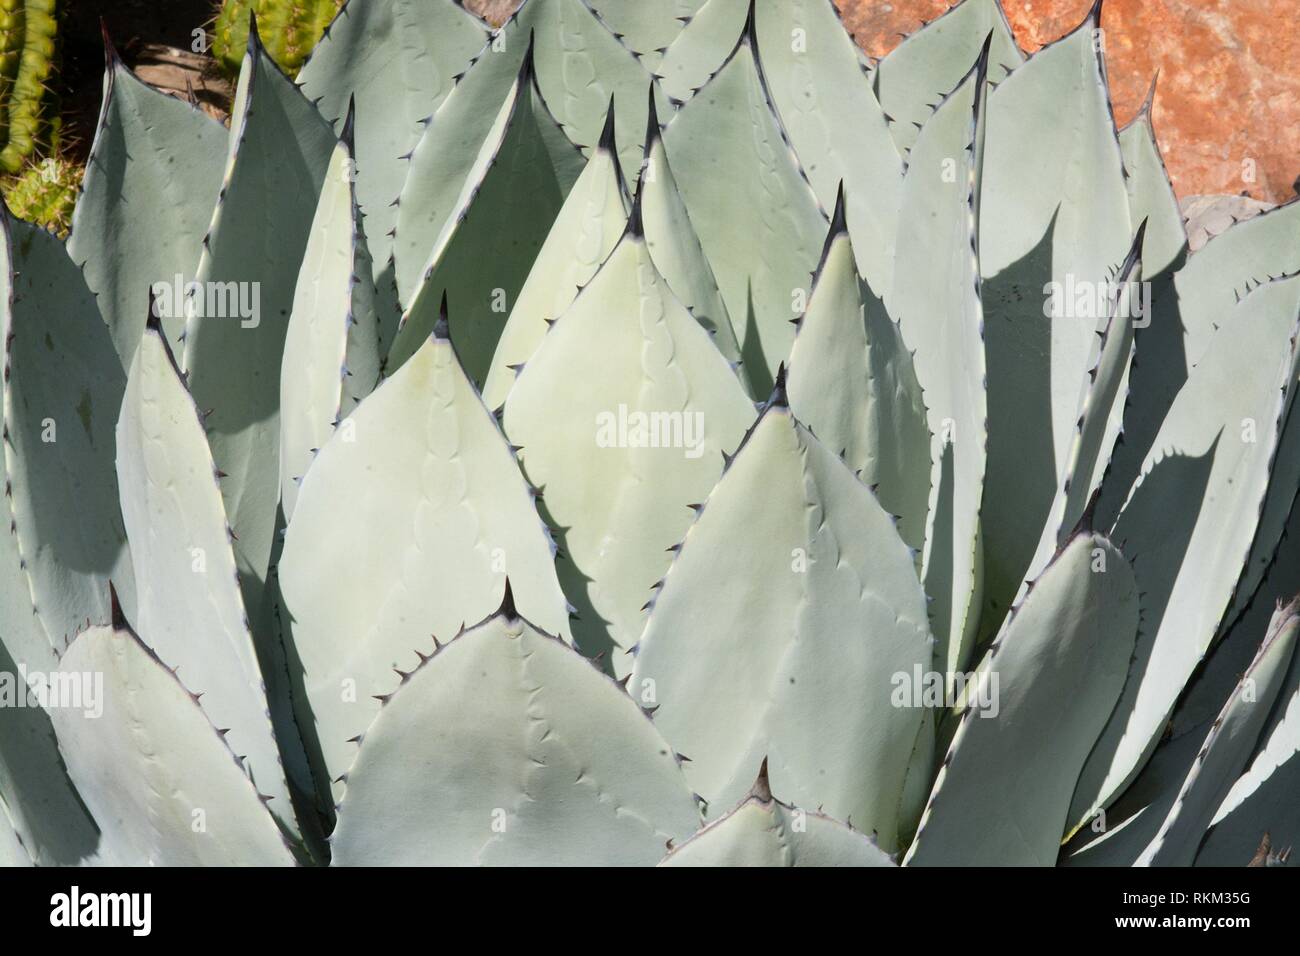 Succulent aloe plant closeup with spikey ends background. Stock Photo